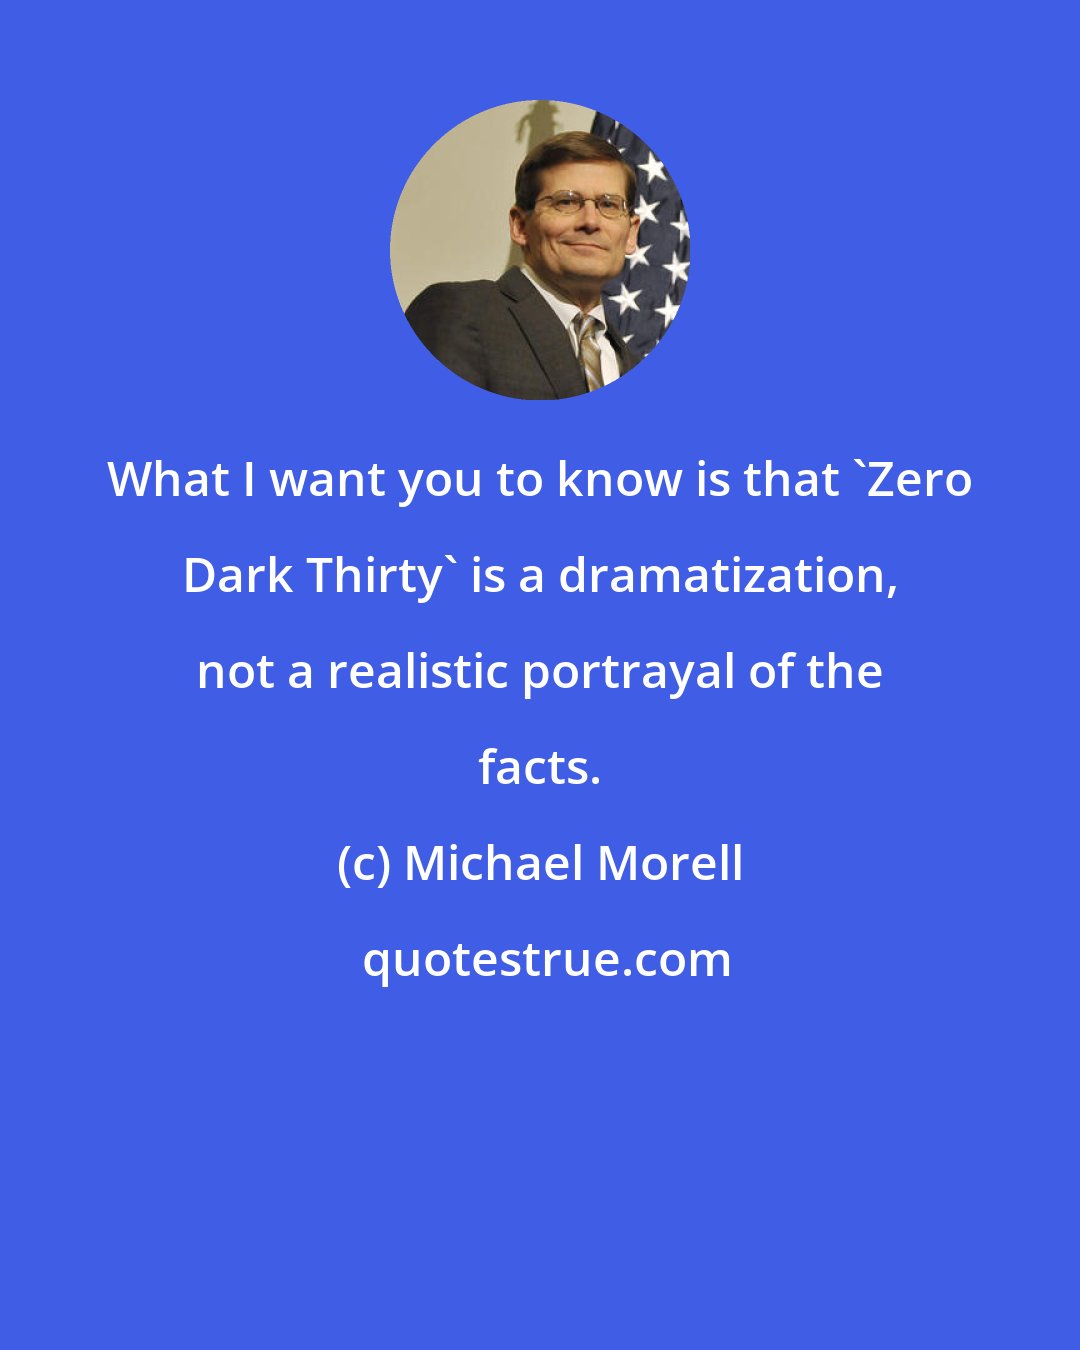 Michael Morell: What I want you to know is that 'Zero Dark Thirty' is a dramatization, not a realistic portrayal of the facts.